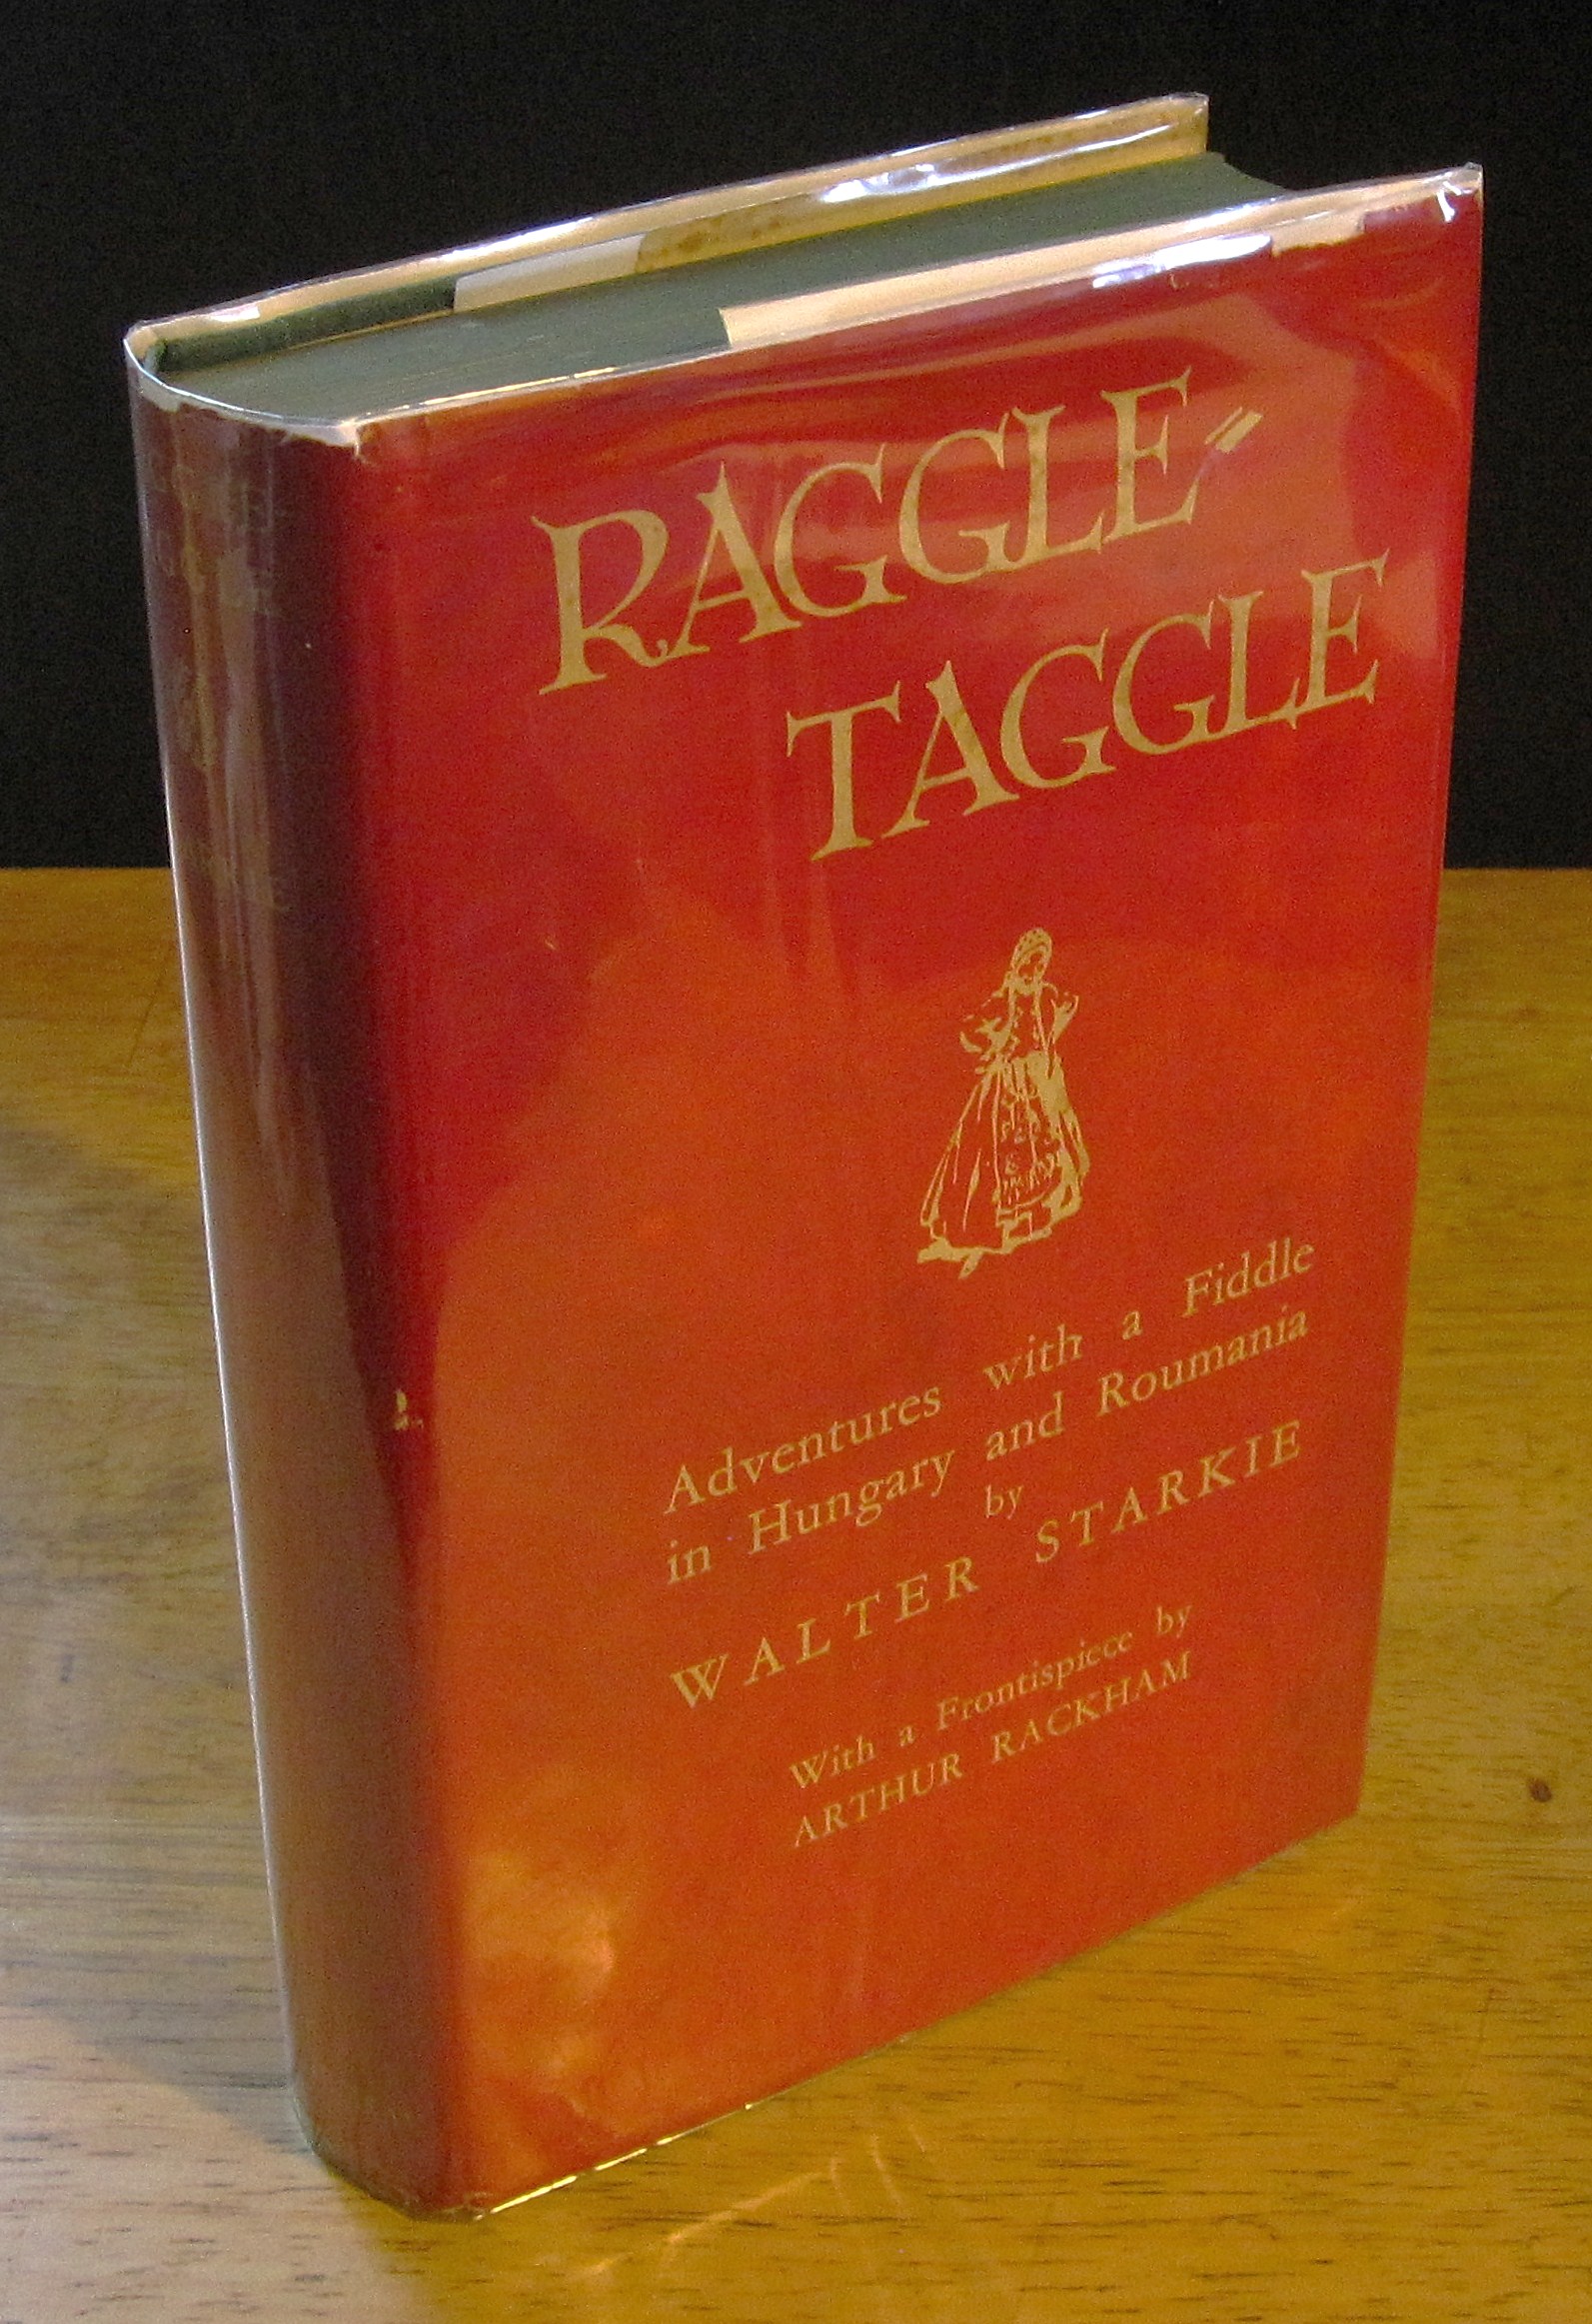 Raggle Taggle: Adventures with a Fiddle in Hungary and Roumania by